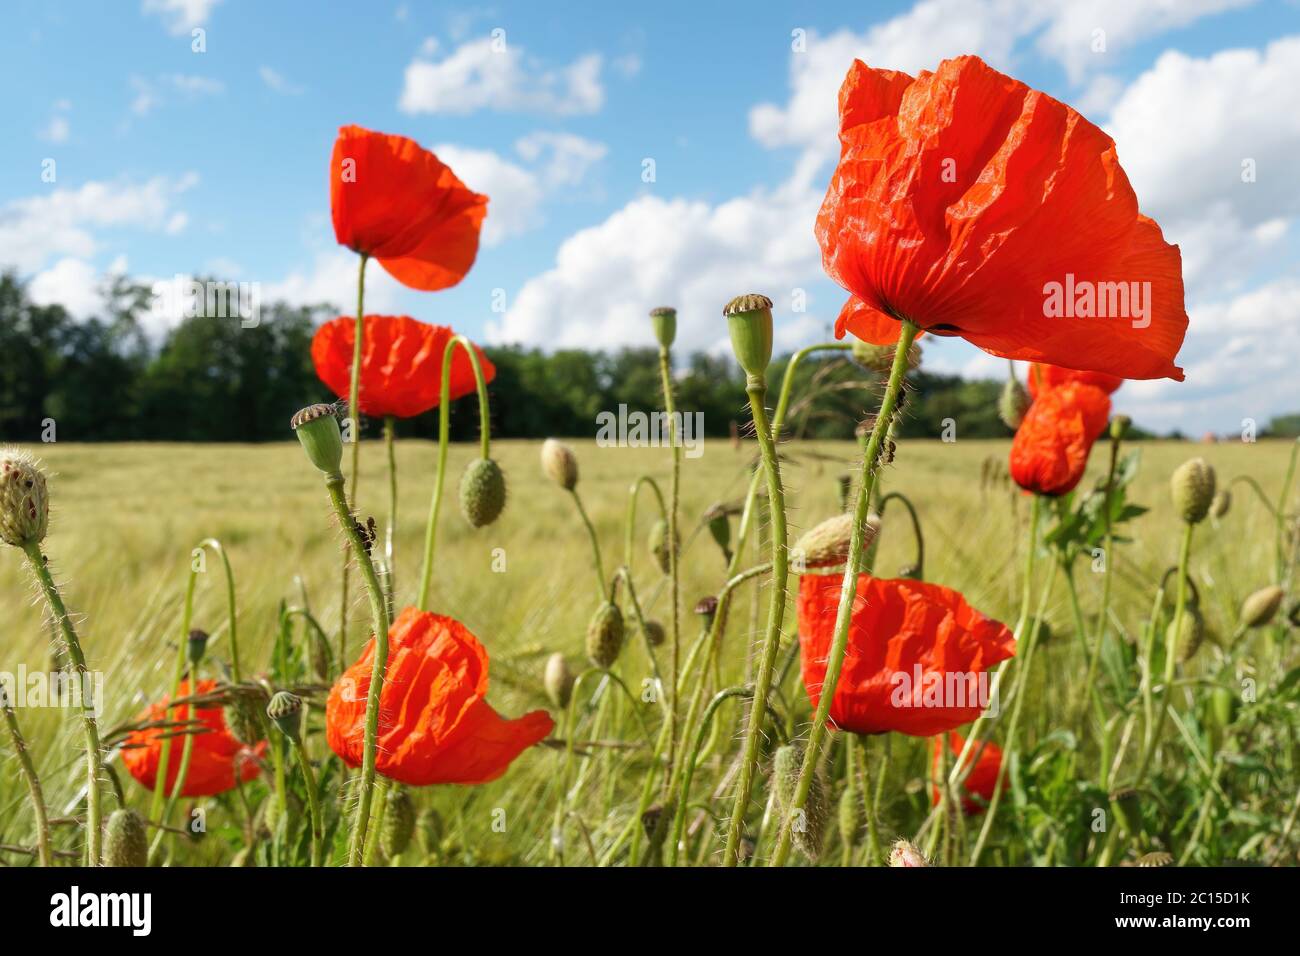 Red poppies in bloom on a field Stock Photo